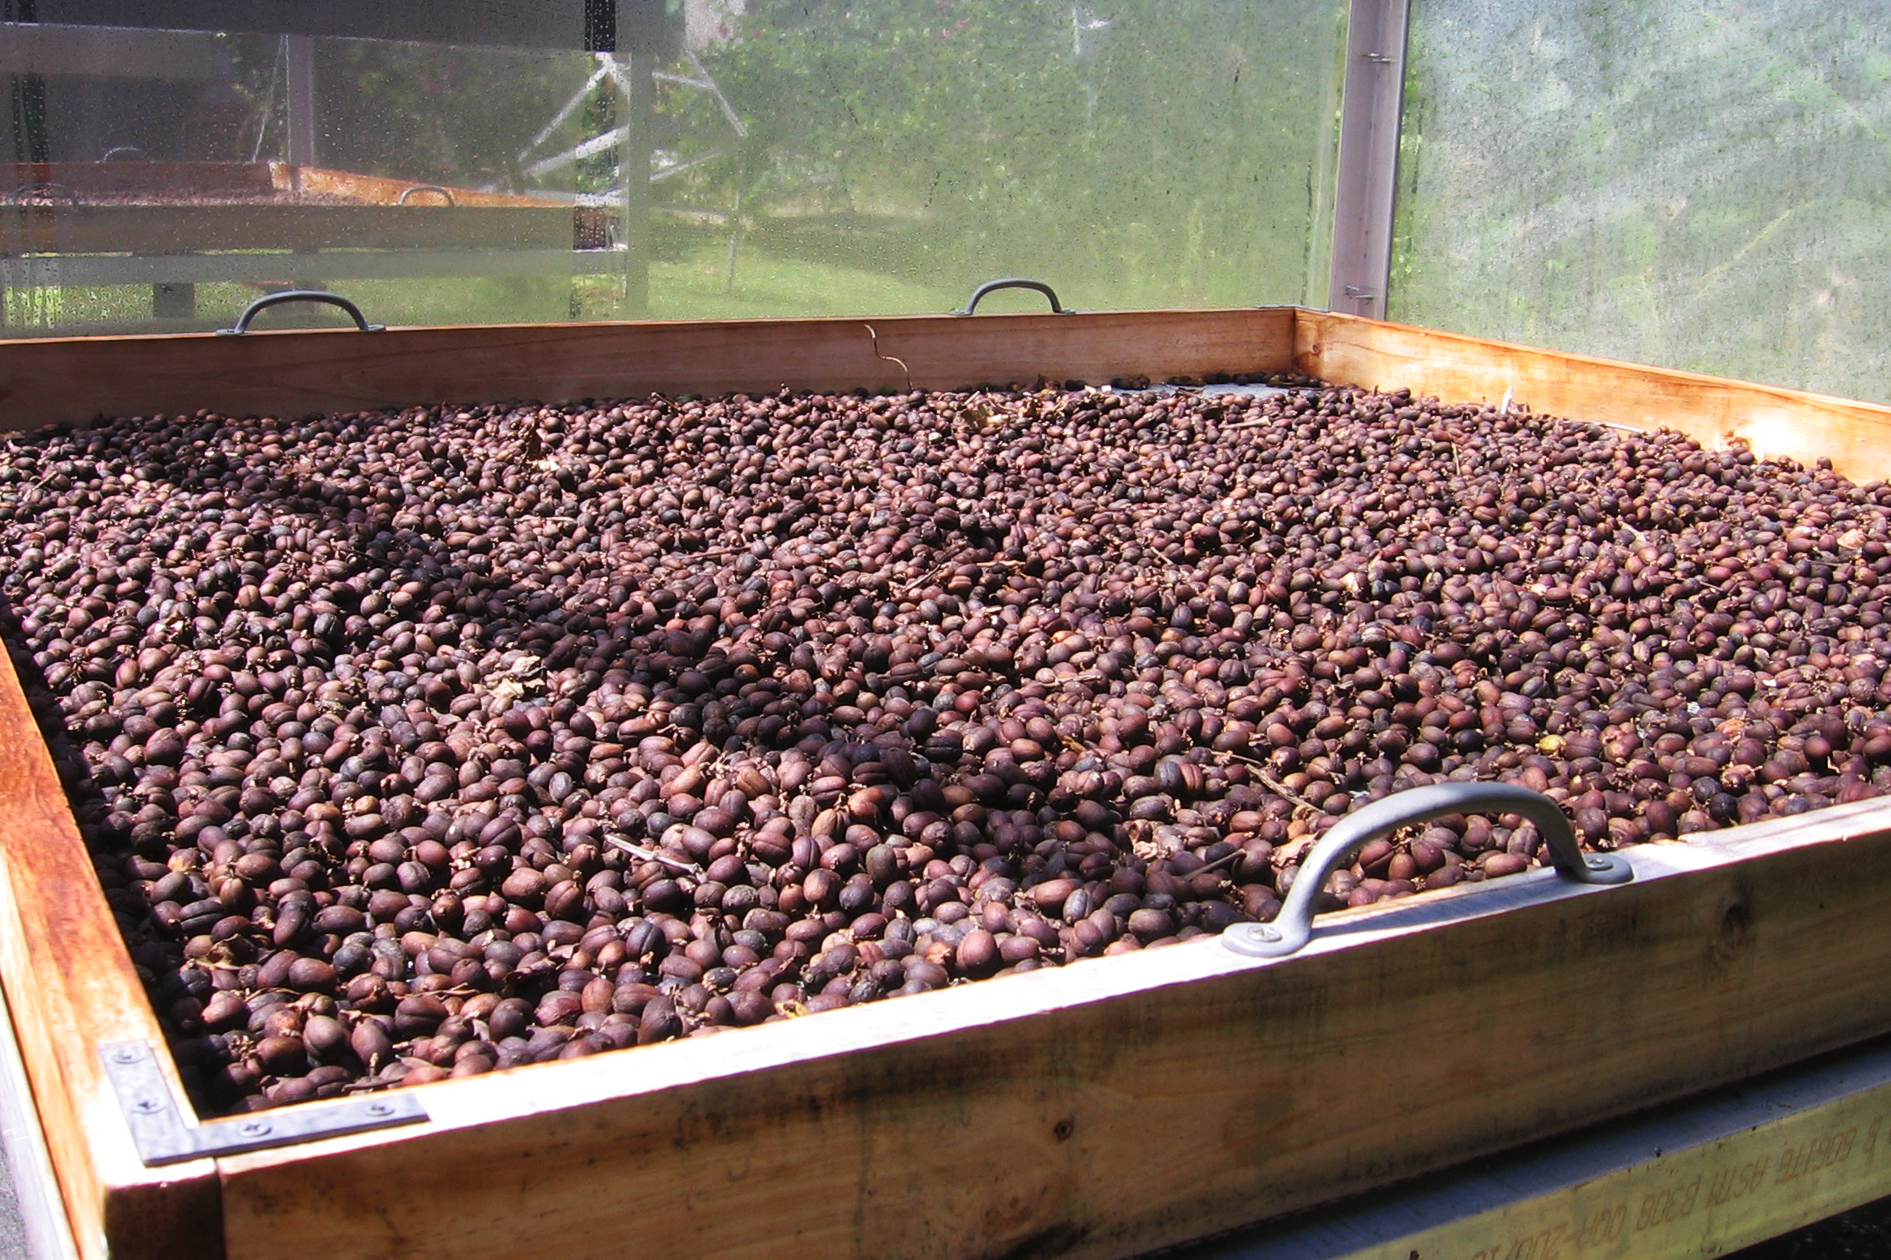 Finca Gripiñas dries its coffee beans in solar driers designed and built by owner Miguel Sastre.